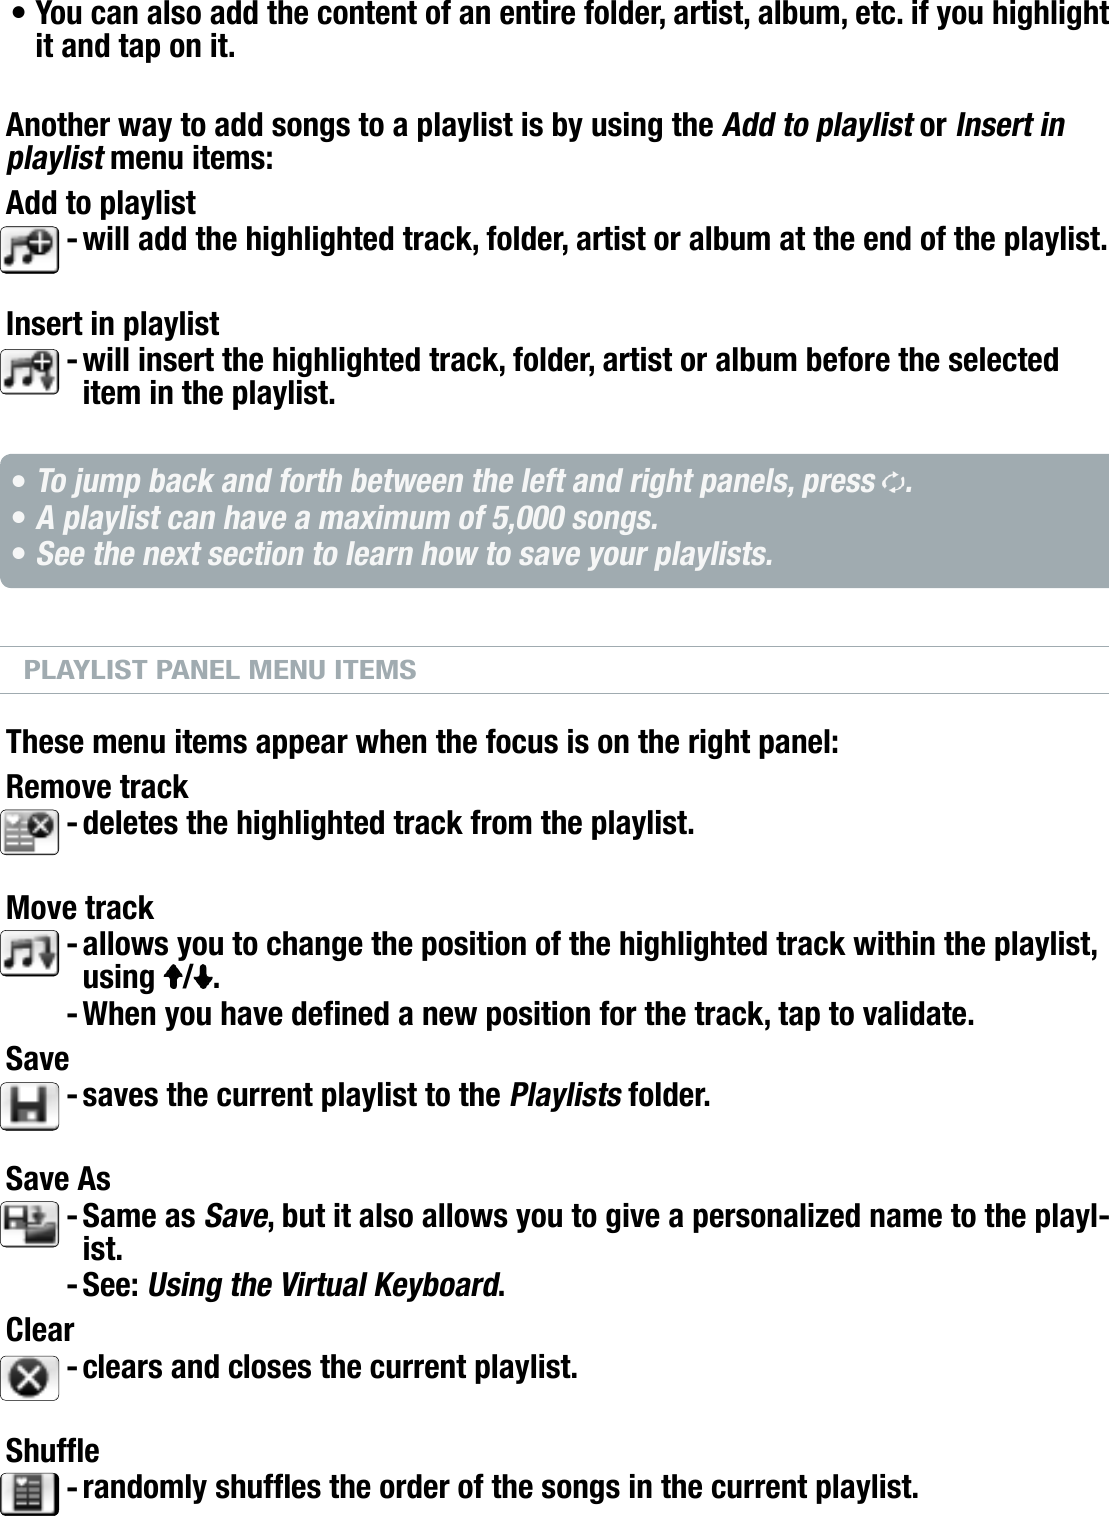 704MANUAL V0.0PLAYING MUSIC   &gt;   p. 21You can also add the content of an entire folder, artist, album, etc. if you highlight it and tap on it.Another way to add songs to a playlist is by using the Add to playlist or Insert in playlist menu items:Add to playlistwill add the highlighted track, folder, artist or album at the end of the playlist.Insert in playlistwill insert the highlighted track, folder, artist or album before the selected item in the playlist.To jump back and forth between the left and right panels, press  .A playlist can have a maximum of 5,000 songs.See the next section to learn how to save your playlists.PLAYLIST PANEL MENU ITEMSThese menu items appear when the focus is on the right panel:Remove trackdeletes the highlighted track from the playlist.Move trackallows you to change the position of the highlighted track within the playlist, using  / .When you have dened a new position for the track, tap to validate.Savesaves the current playlist to the Playlists folder.Save AsSame as Save, but it also allows you to give a personalized name to the playl-ist.See: Using the Virtual Keyboard.Clearclears and closes the current playlist.Shuferandomly shufes the order of the songs in the current playlist.•--•••--------